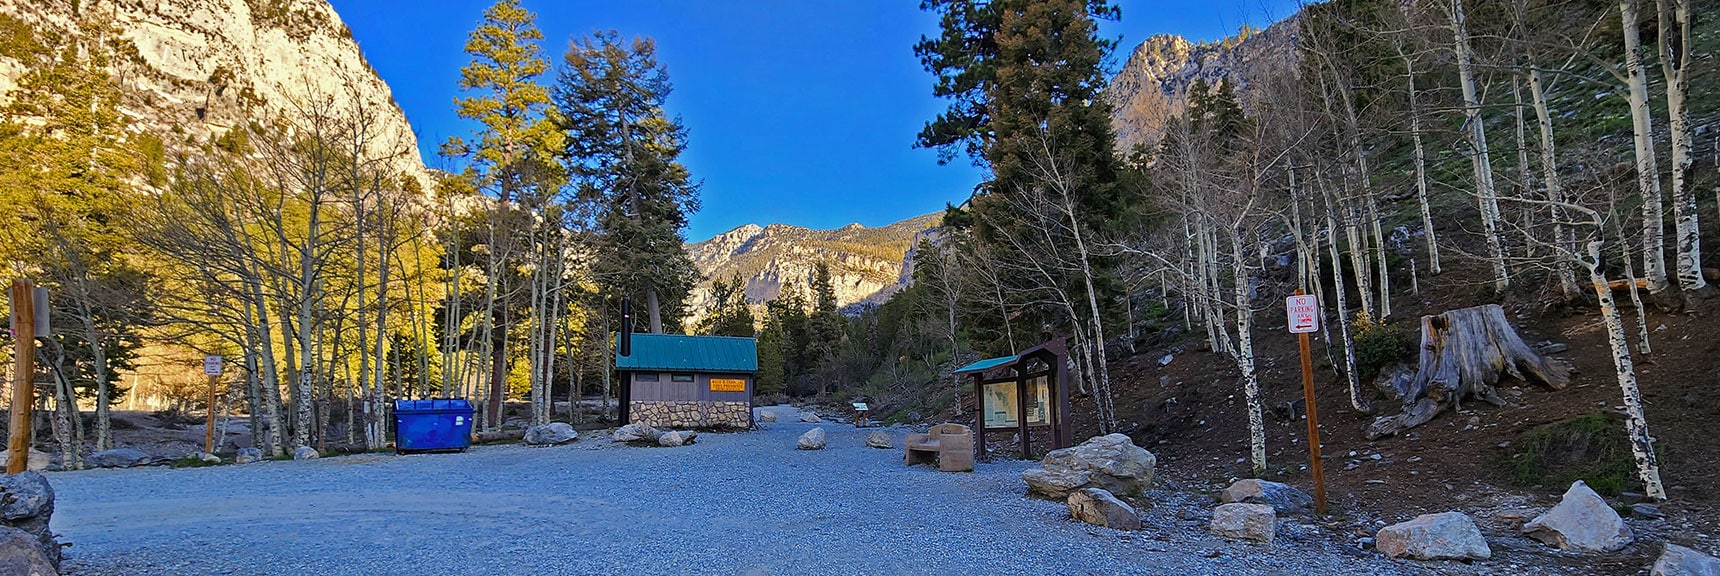 Arrival at Mary Jane Falls Trailhead. Parking, Primitive Restrooms | Mary Jane Falls | Mt. Charleston Wilderness | Spring Mountains, Nevada